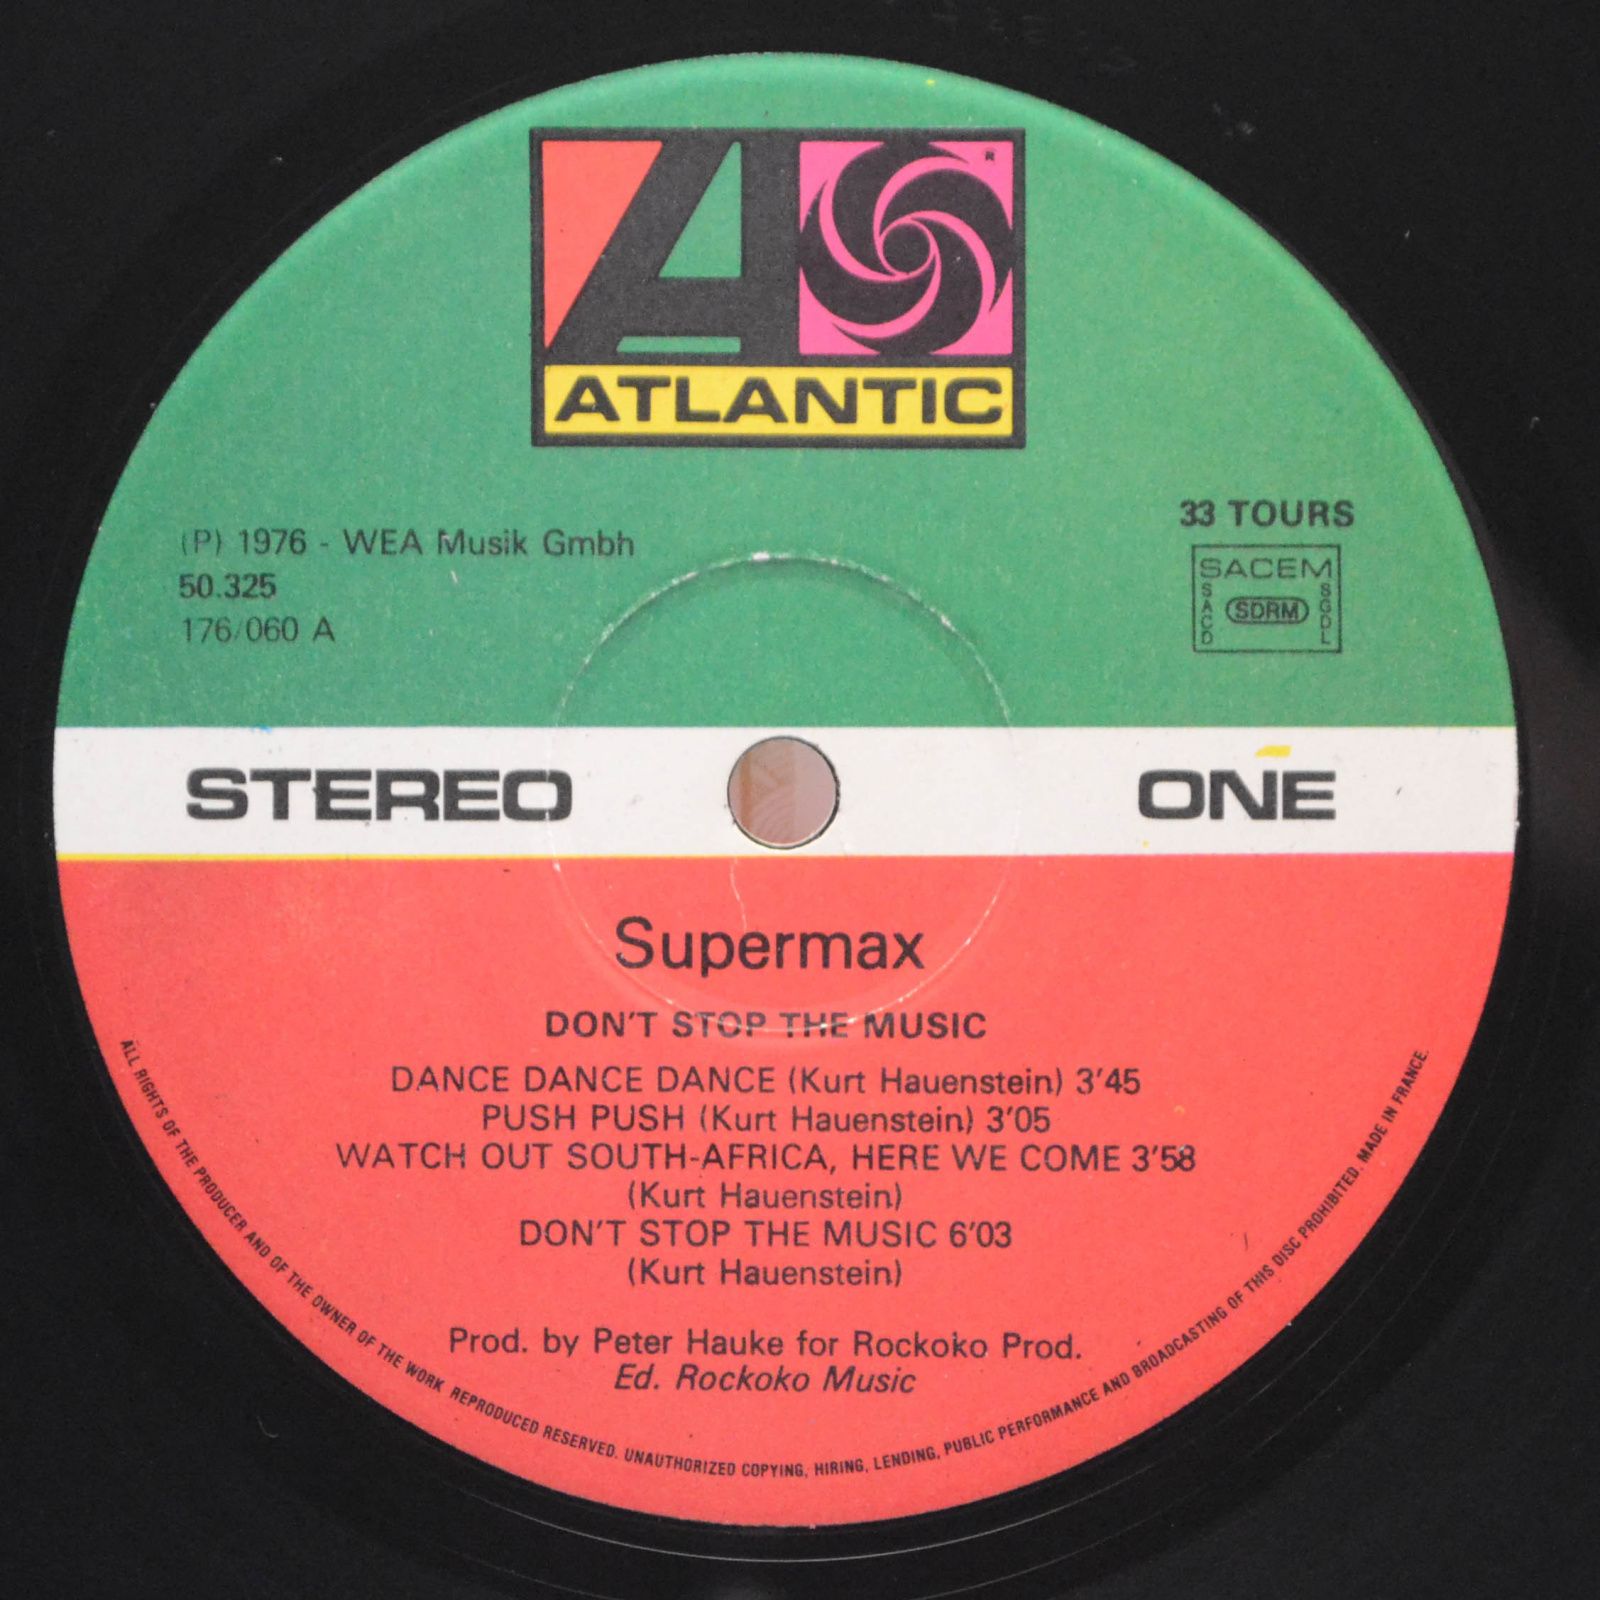 Supermax — Don't Stop The Music, 1977